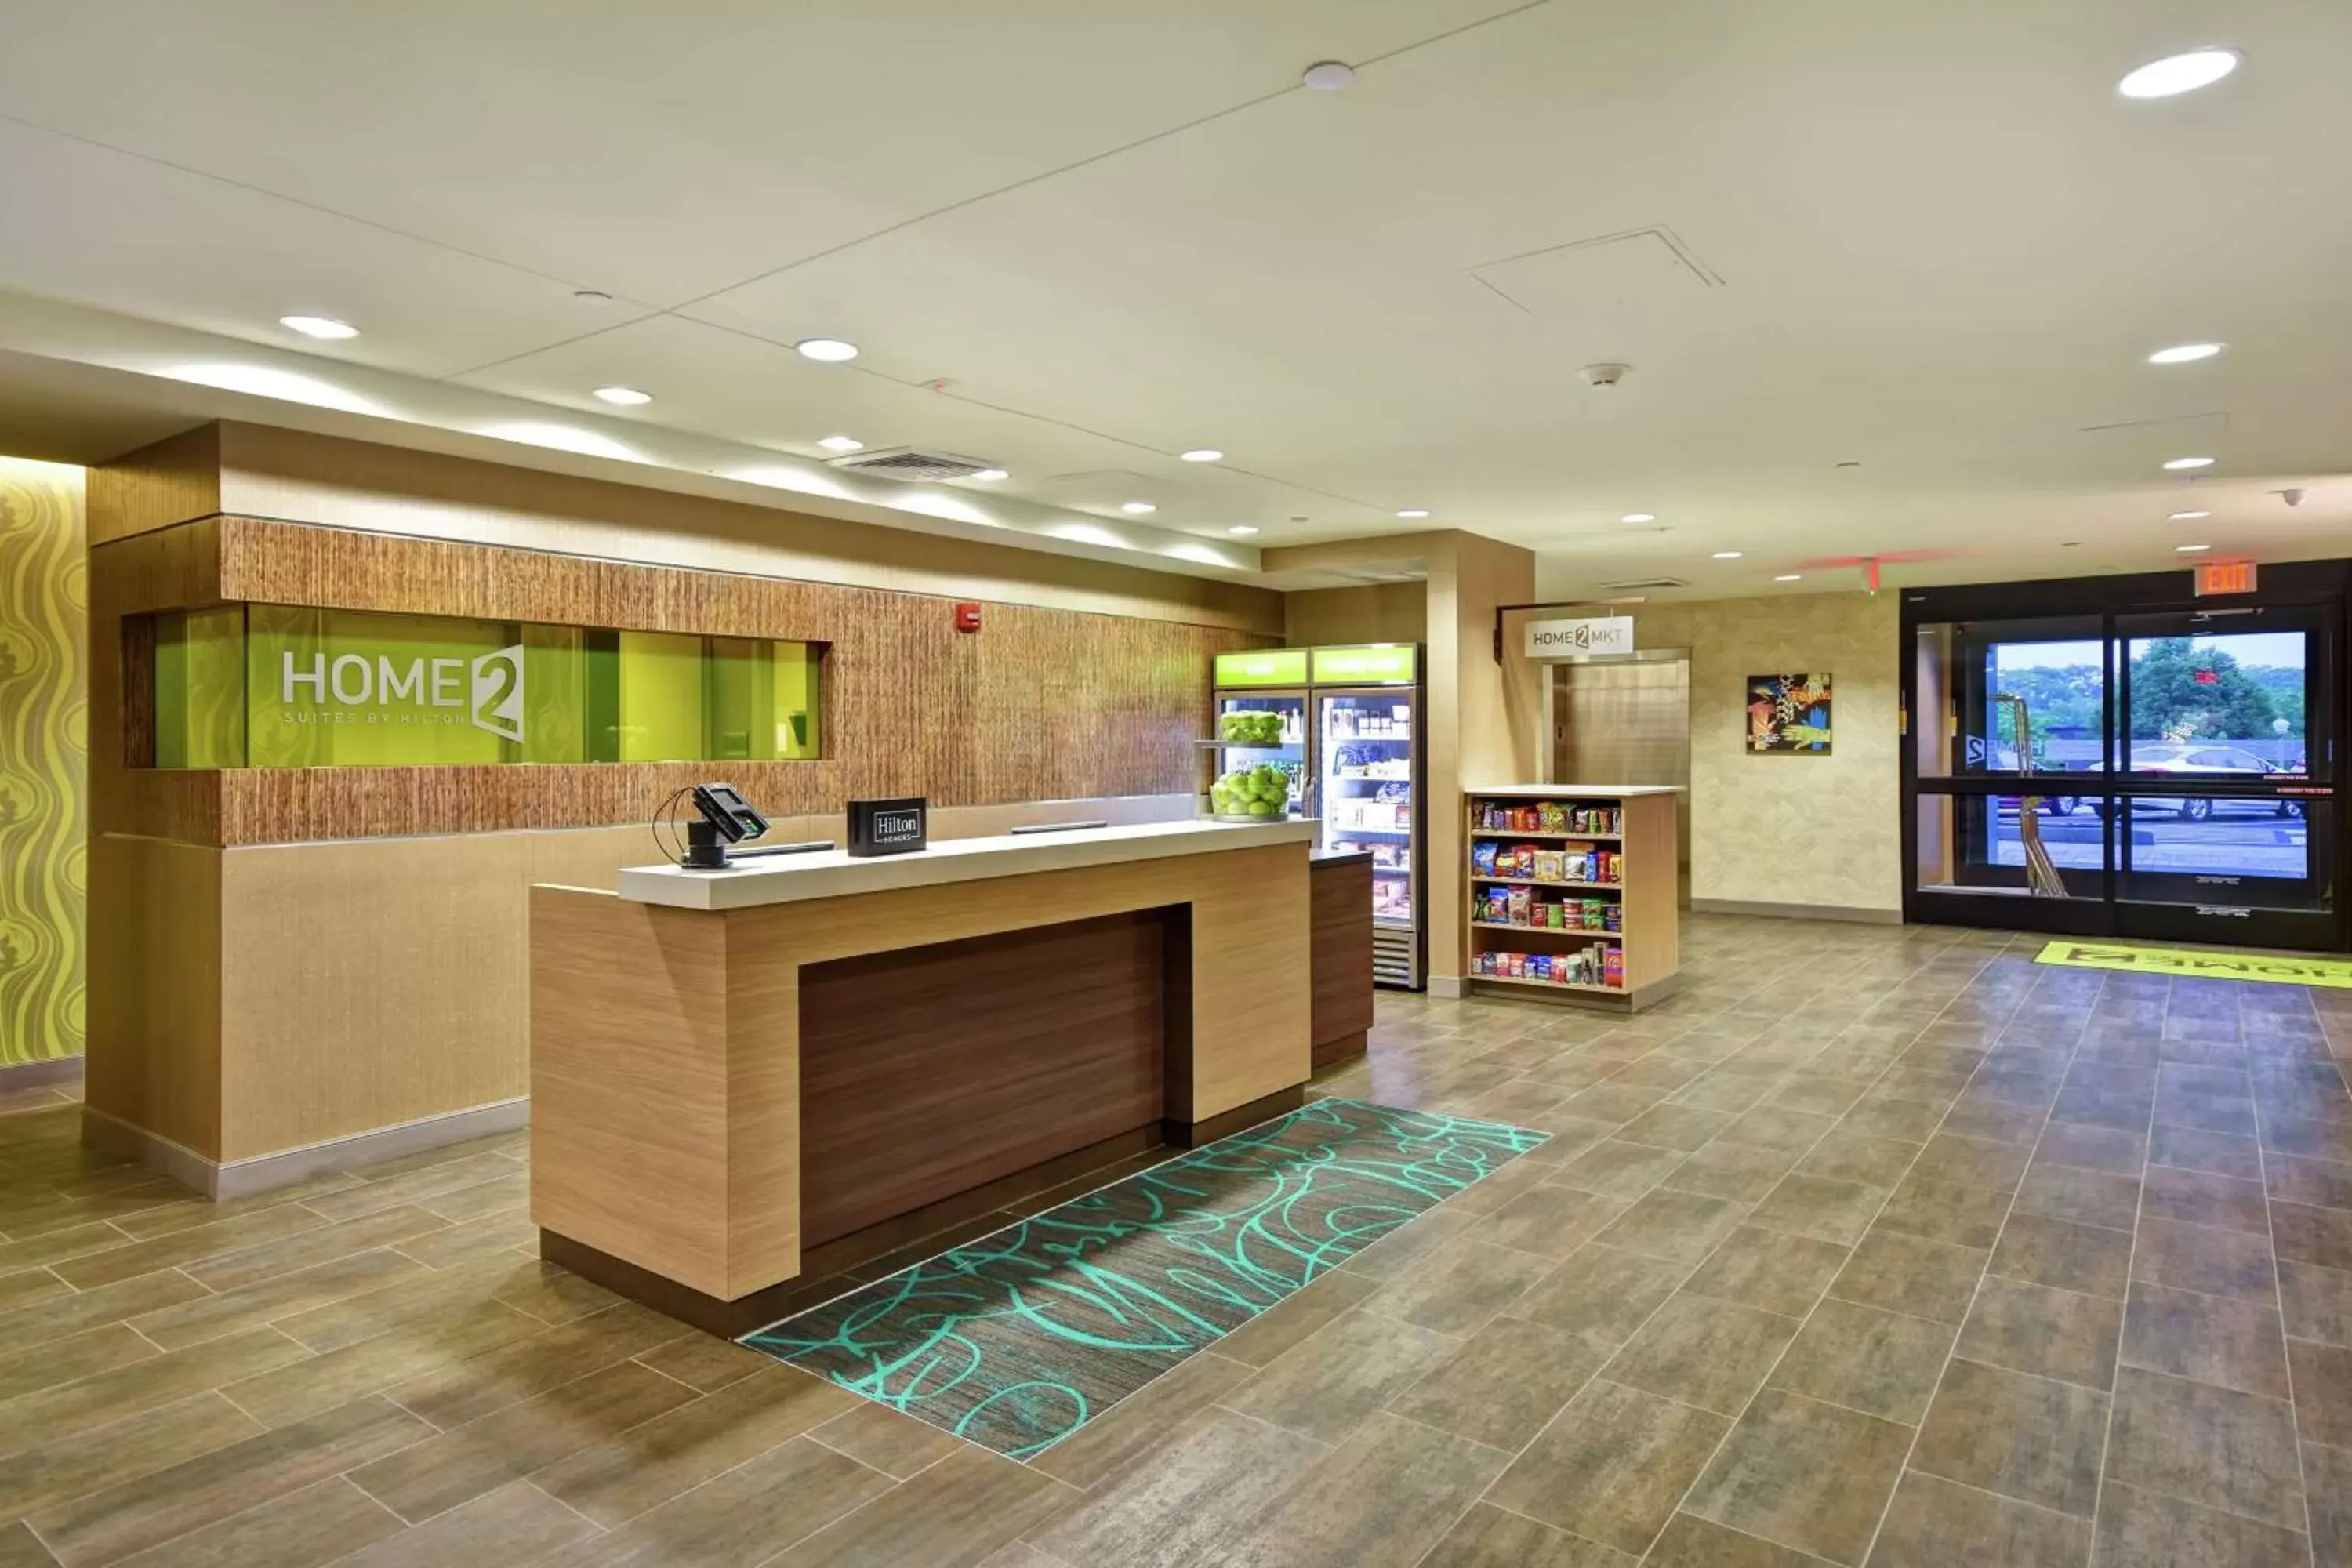 Restaurant/places to eat, Lobby/Reception in Home2 Suites Mechanicsburg